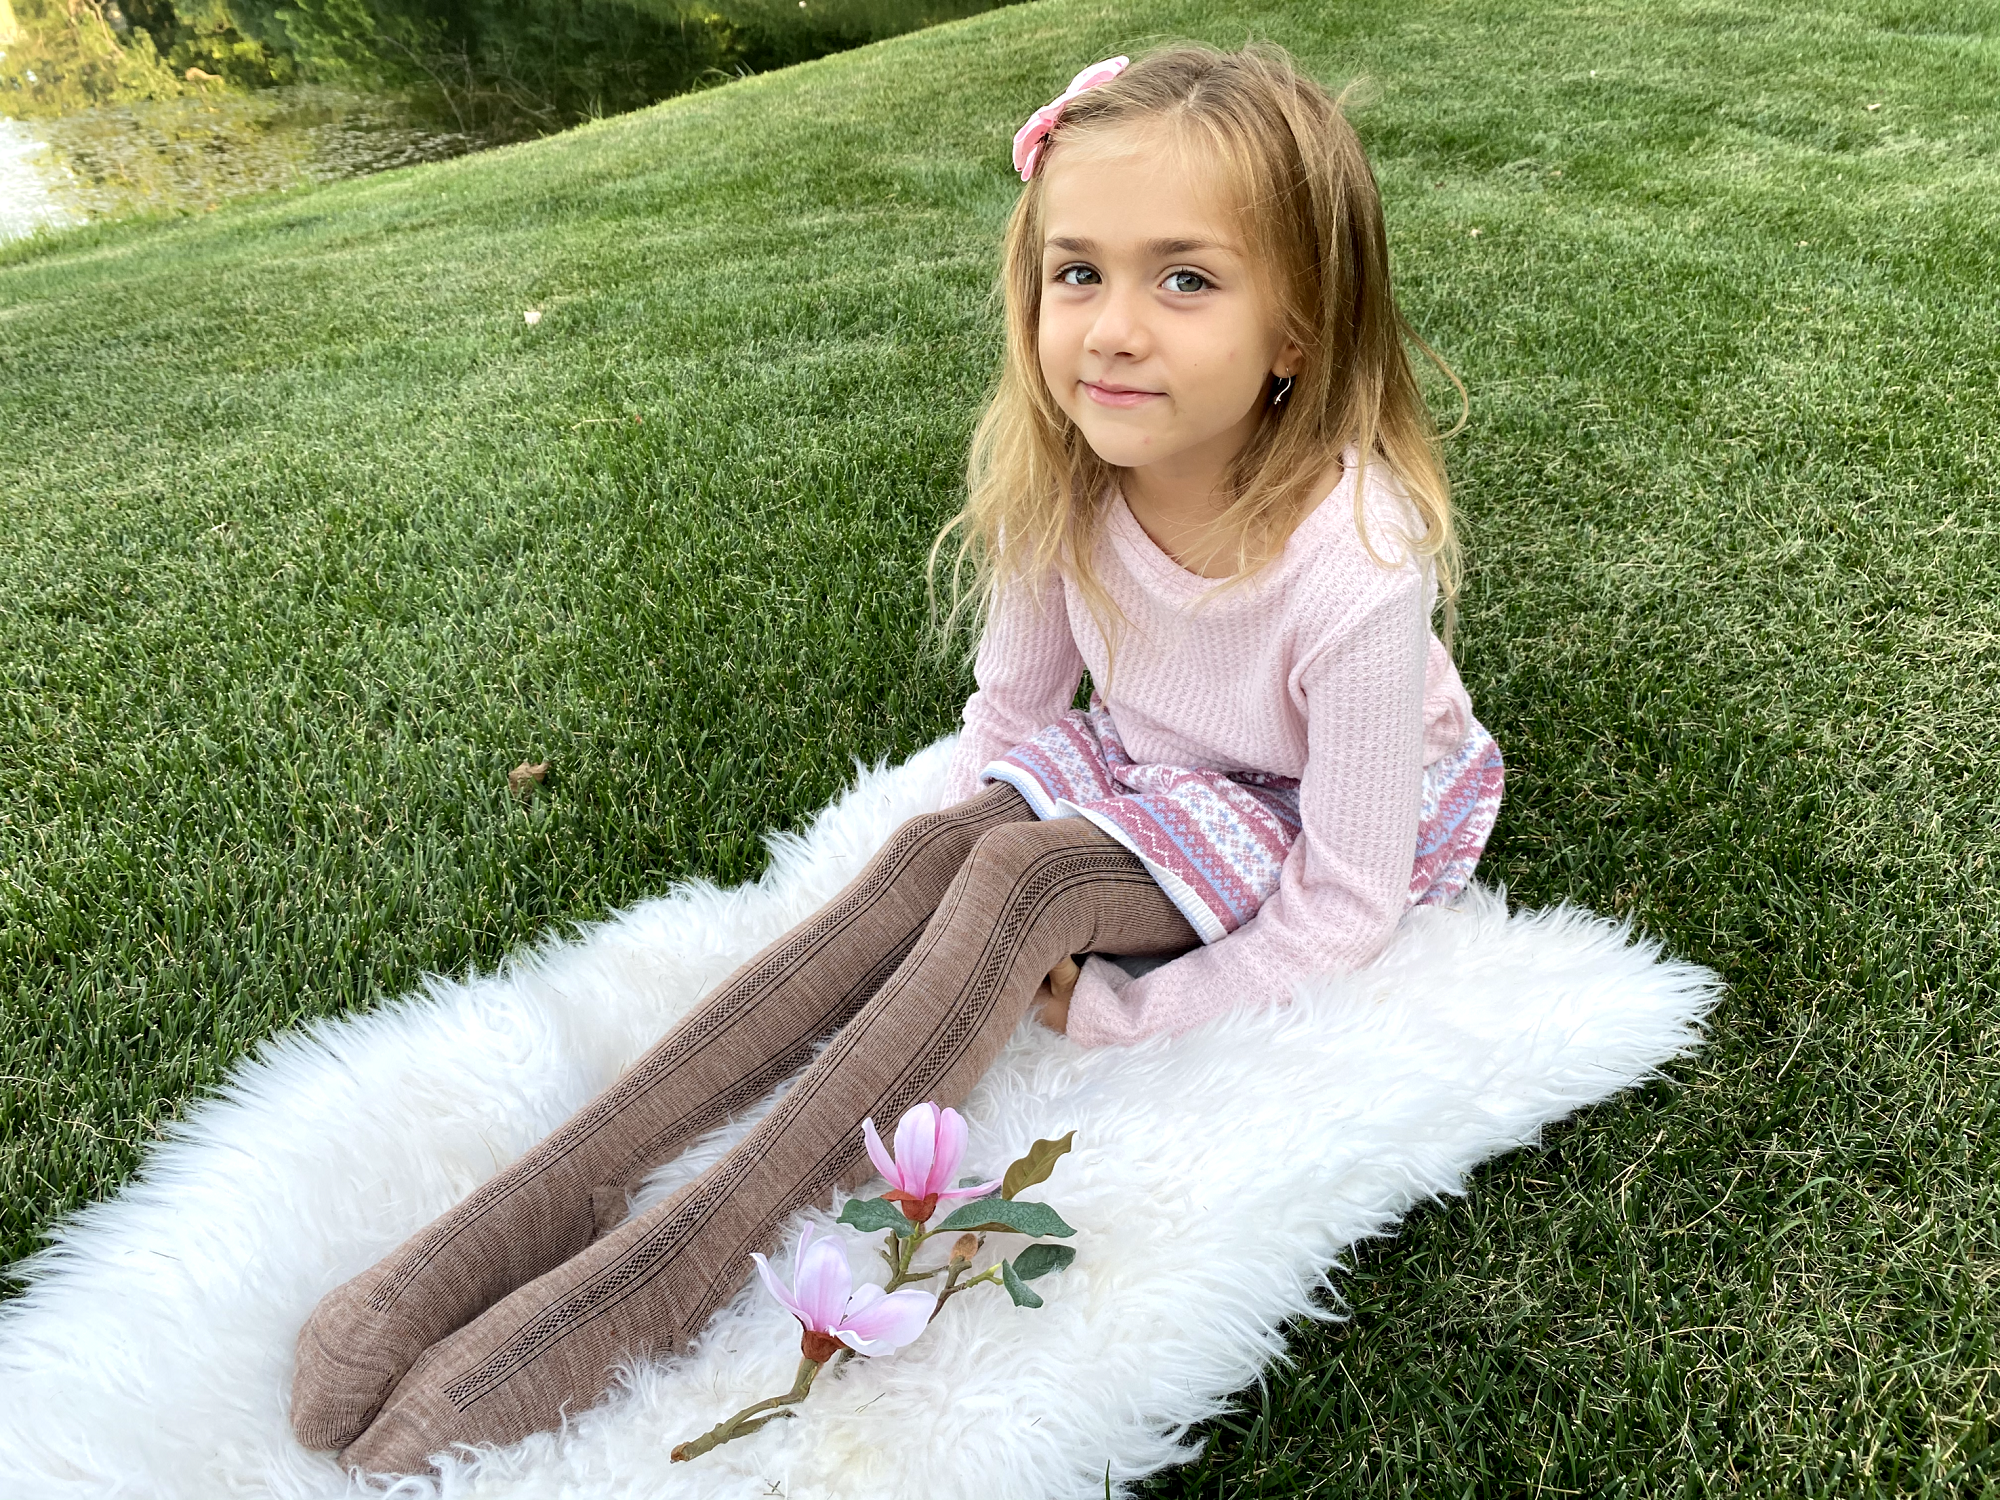 Costume Tights | Ballet Dance Tights |Girls Tights  | Kids Leggings | Flower Girl | Acrylic Tights  | First Day of School | Back to School